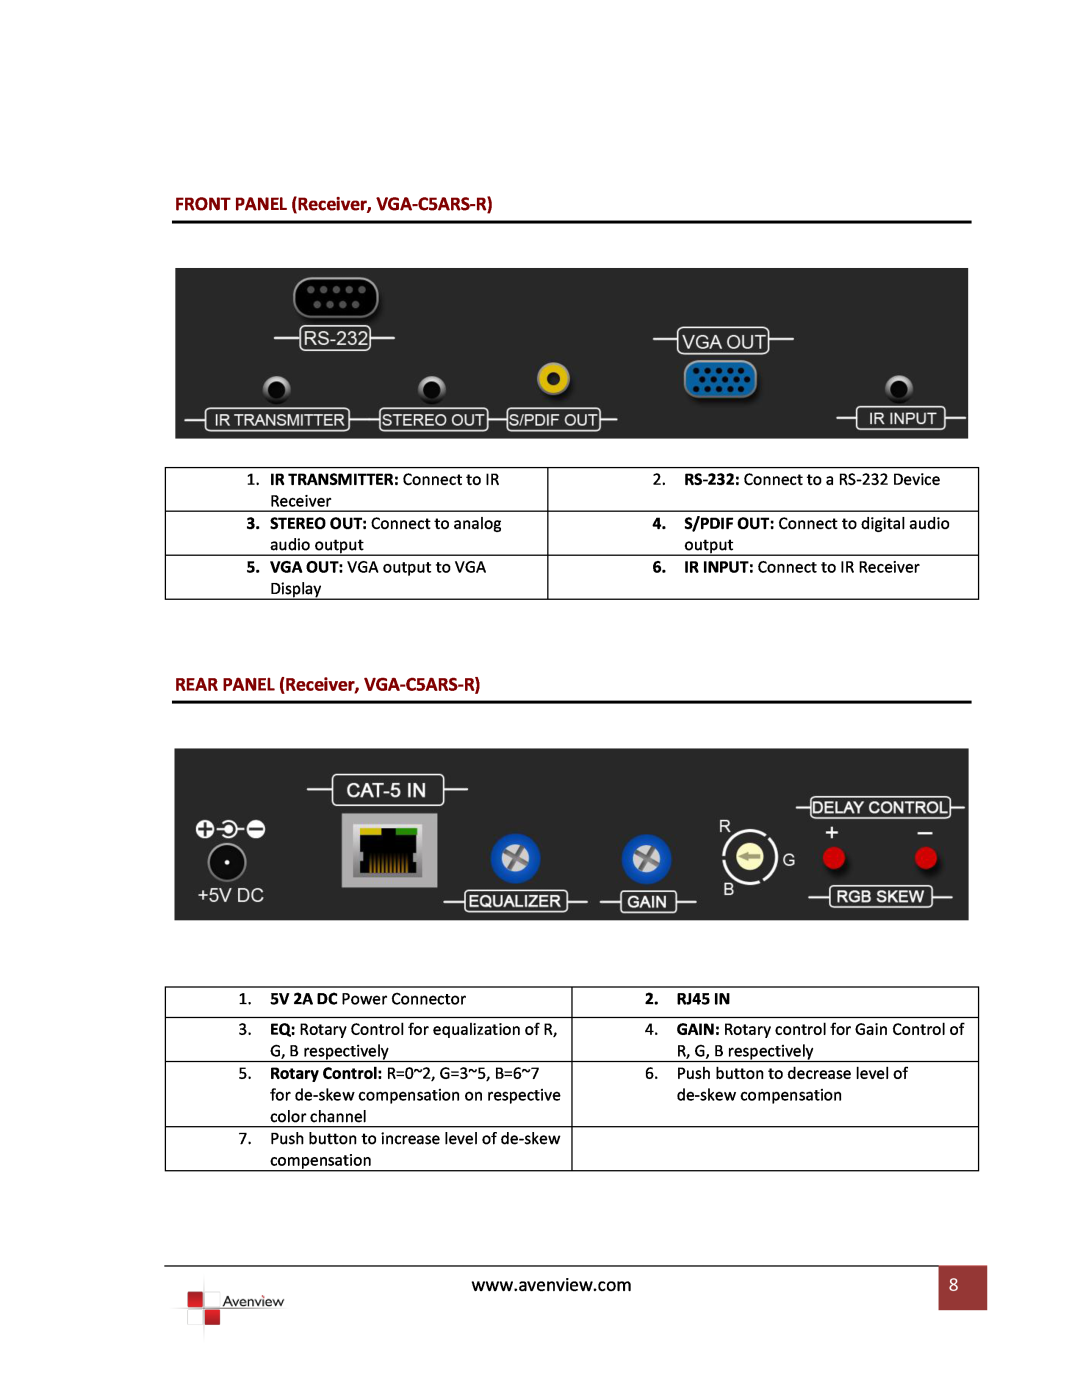 Avenview VR 2000 specifications FRONT PANEL Receiver, VGA-C5ARS-R, REAR PANEL Receiver, VGA-C5ARS-R, RJ45 IN 